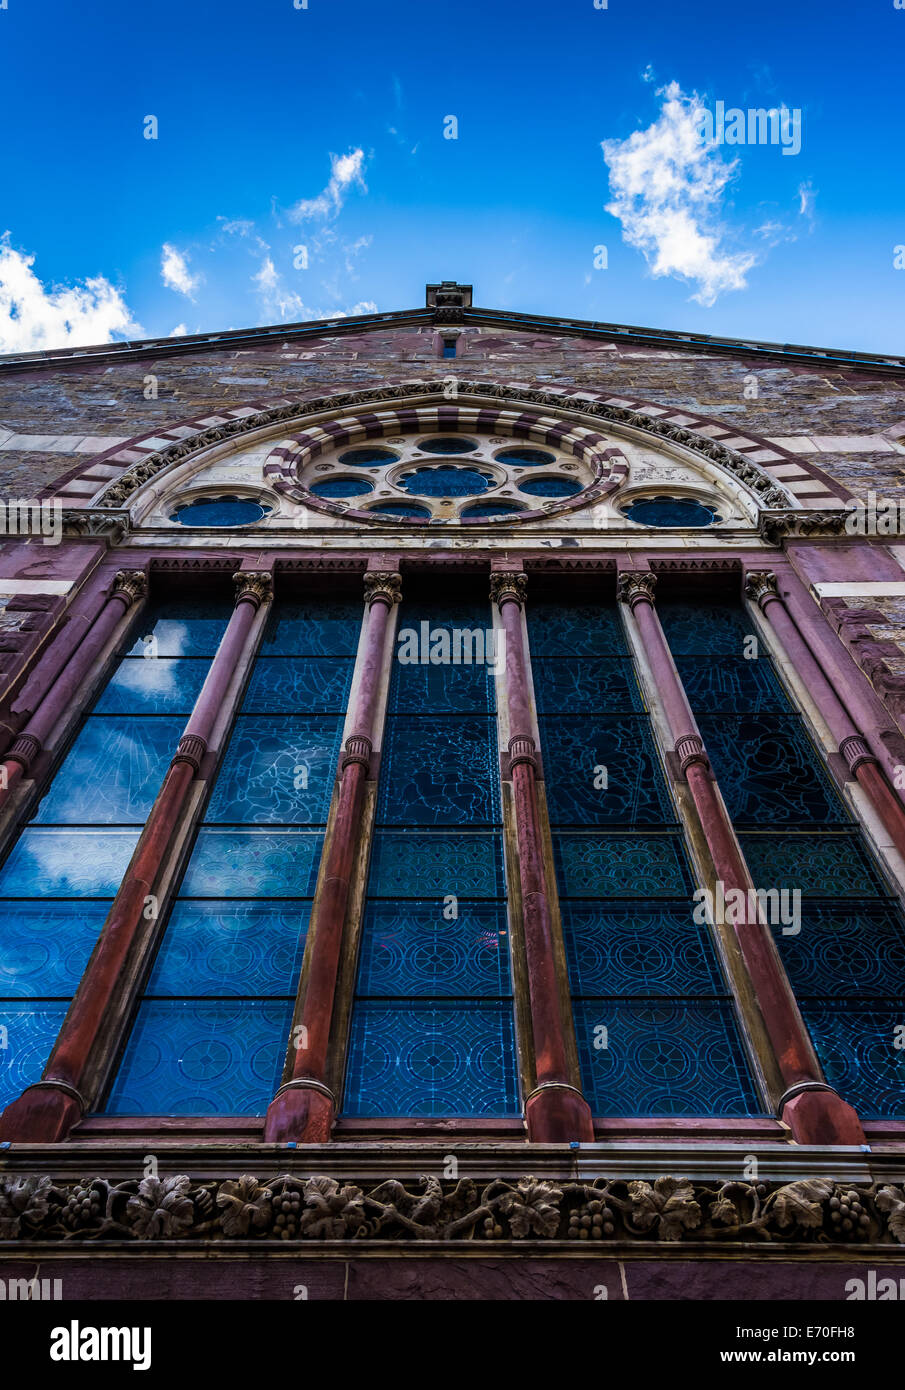 Stained glass windows on the side of a church in Boston, Massachusetts. Stock Photo